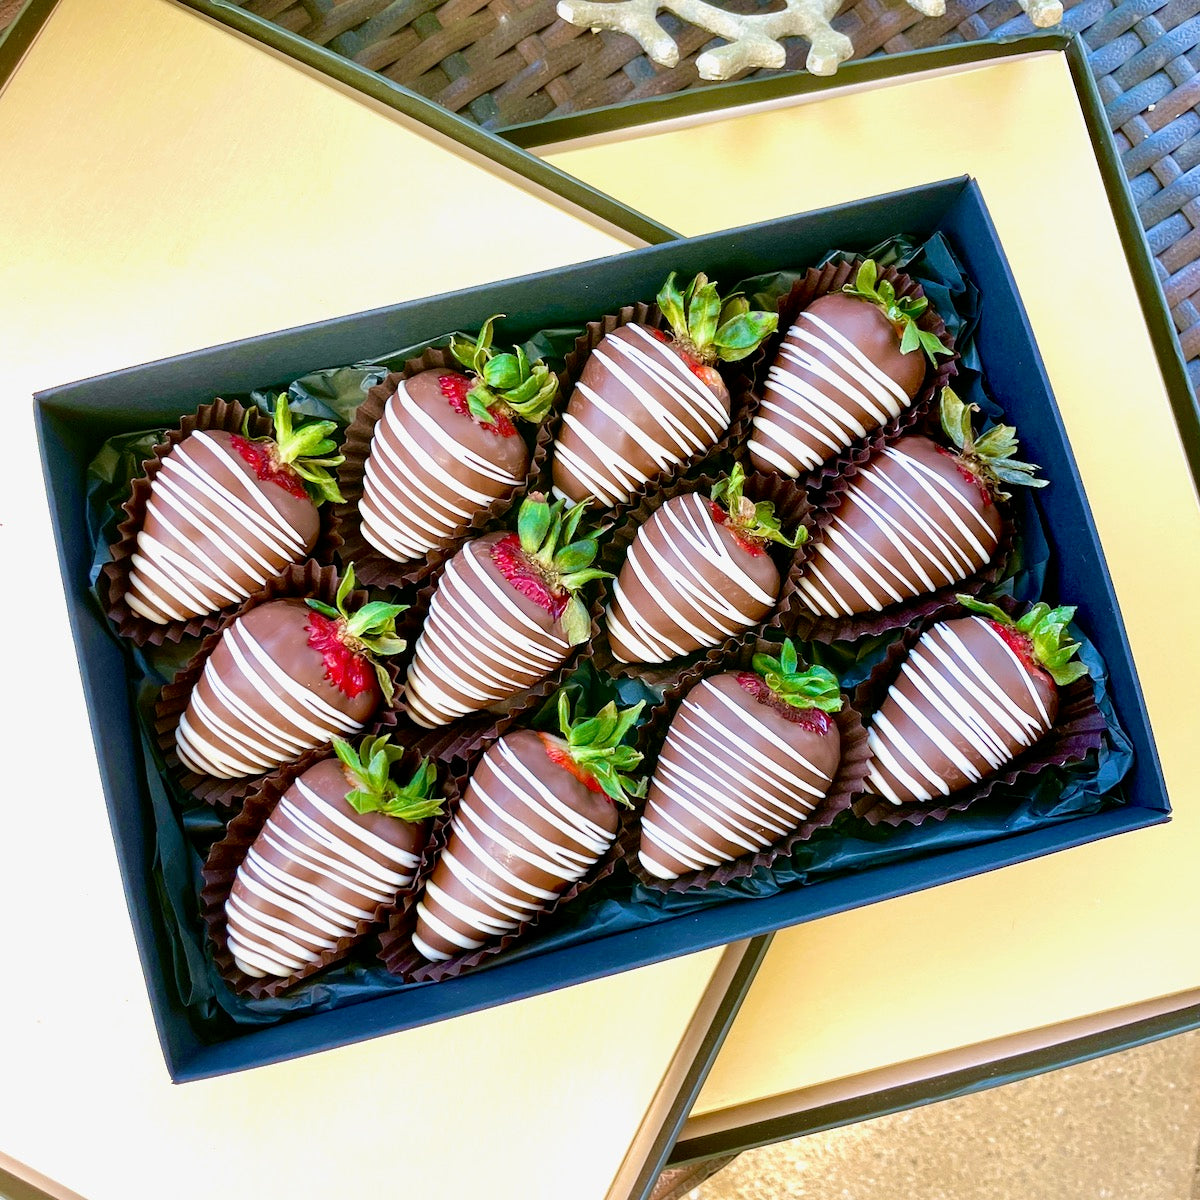 Strawberries covered in chocolate near me